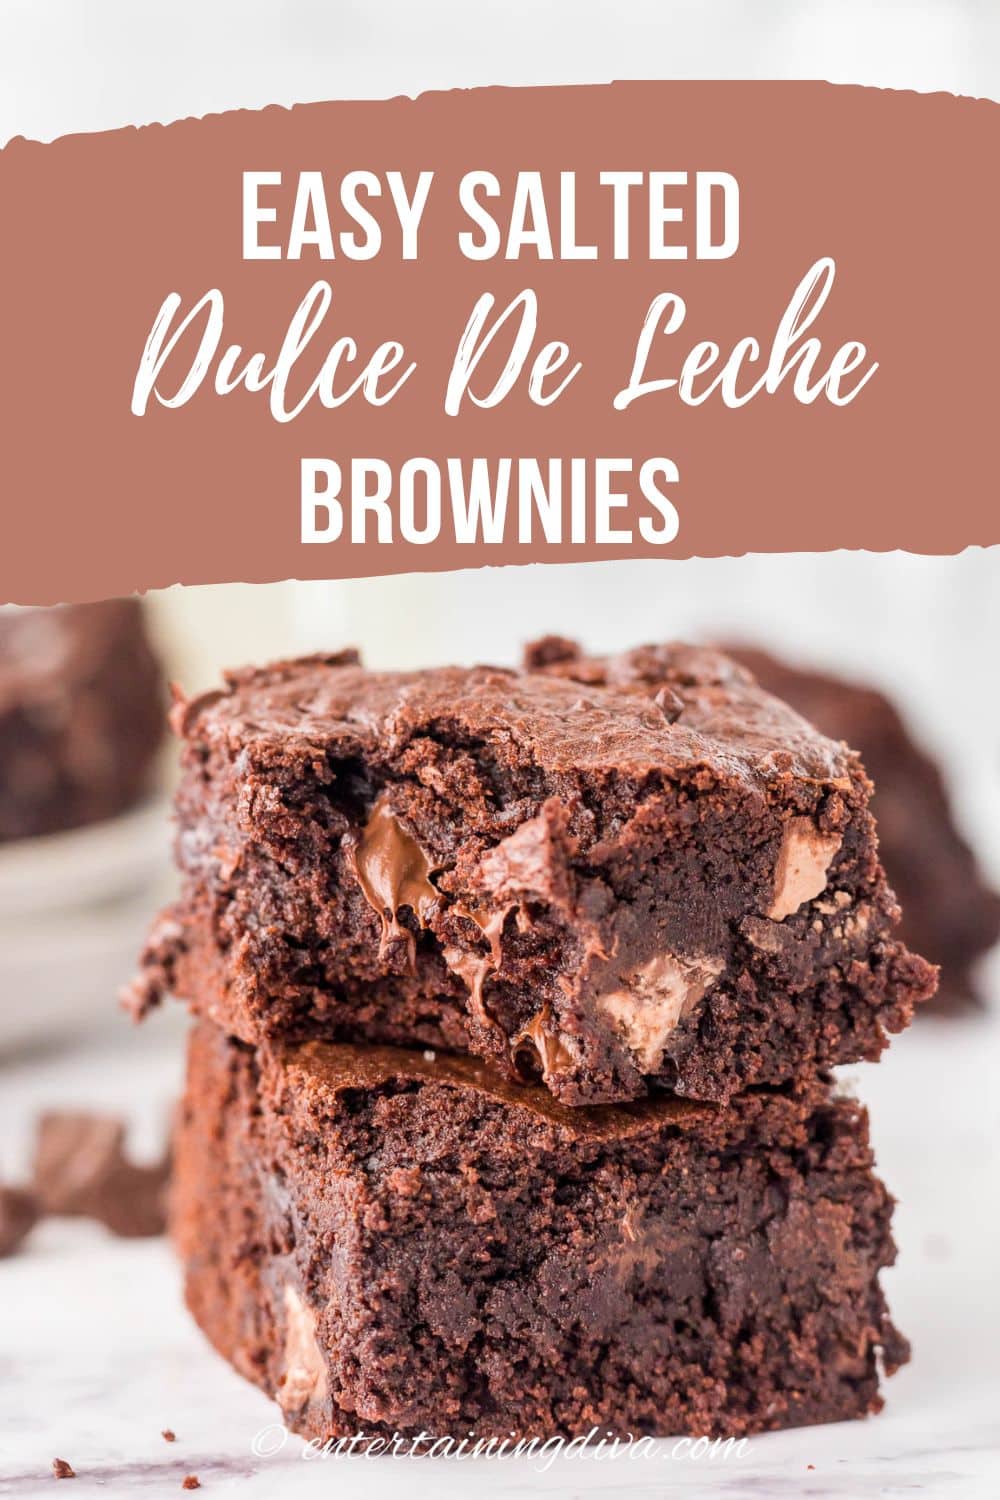 Easy Salted Dulce De Leche Brownies.